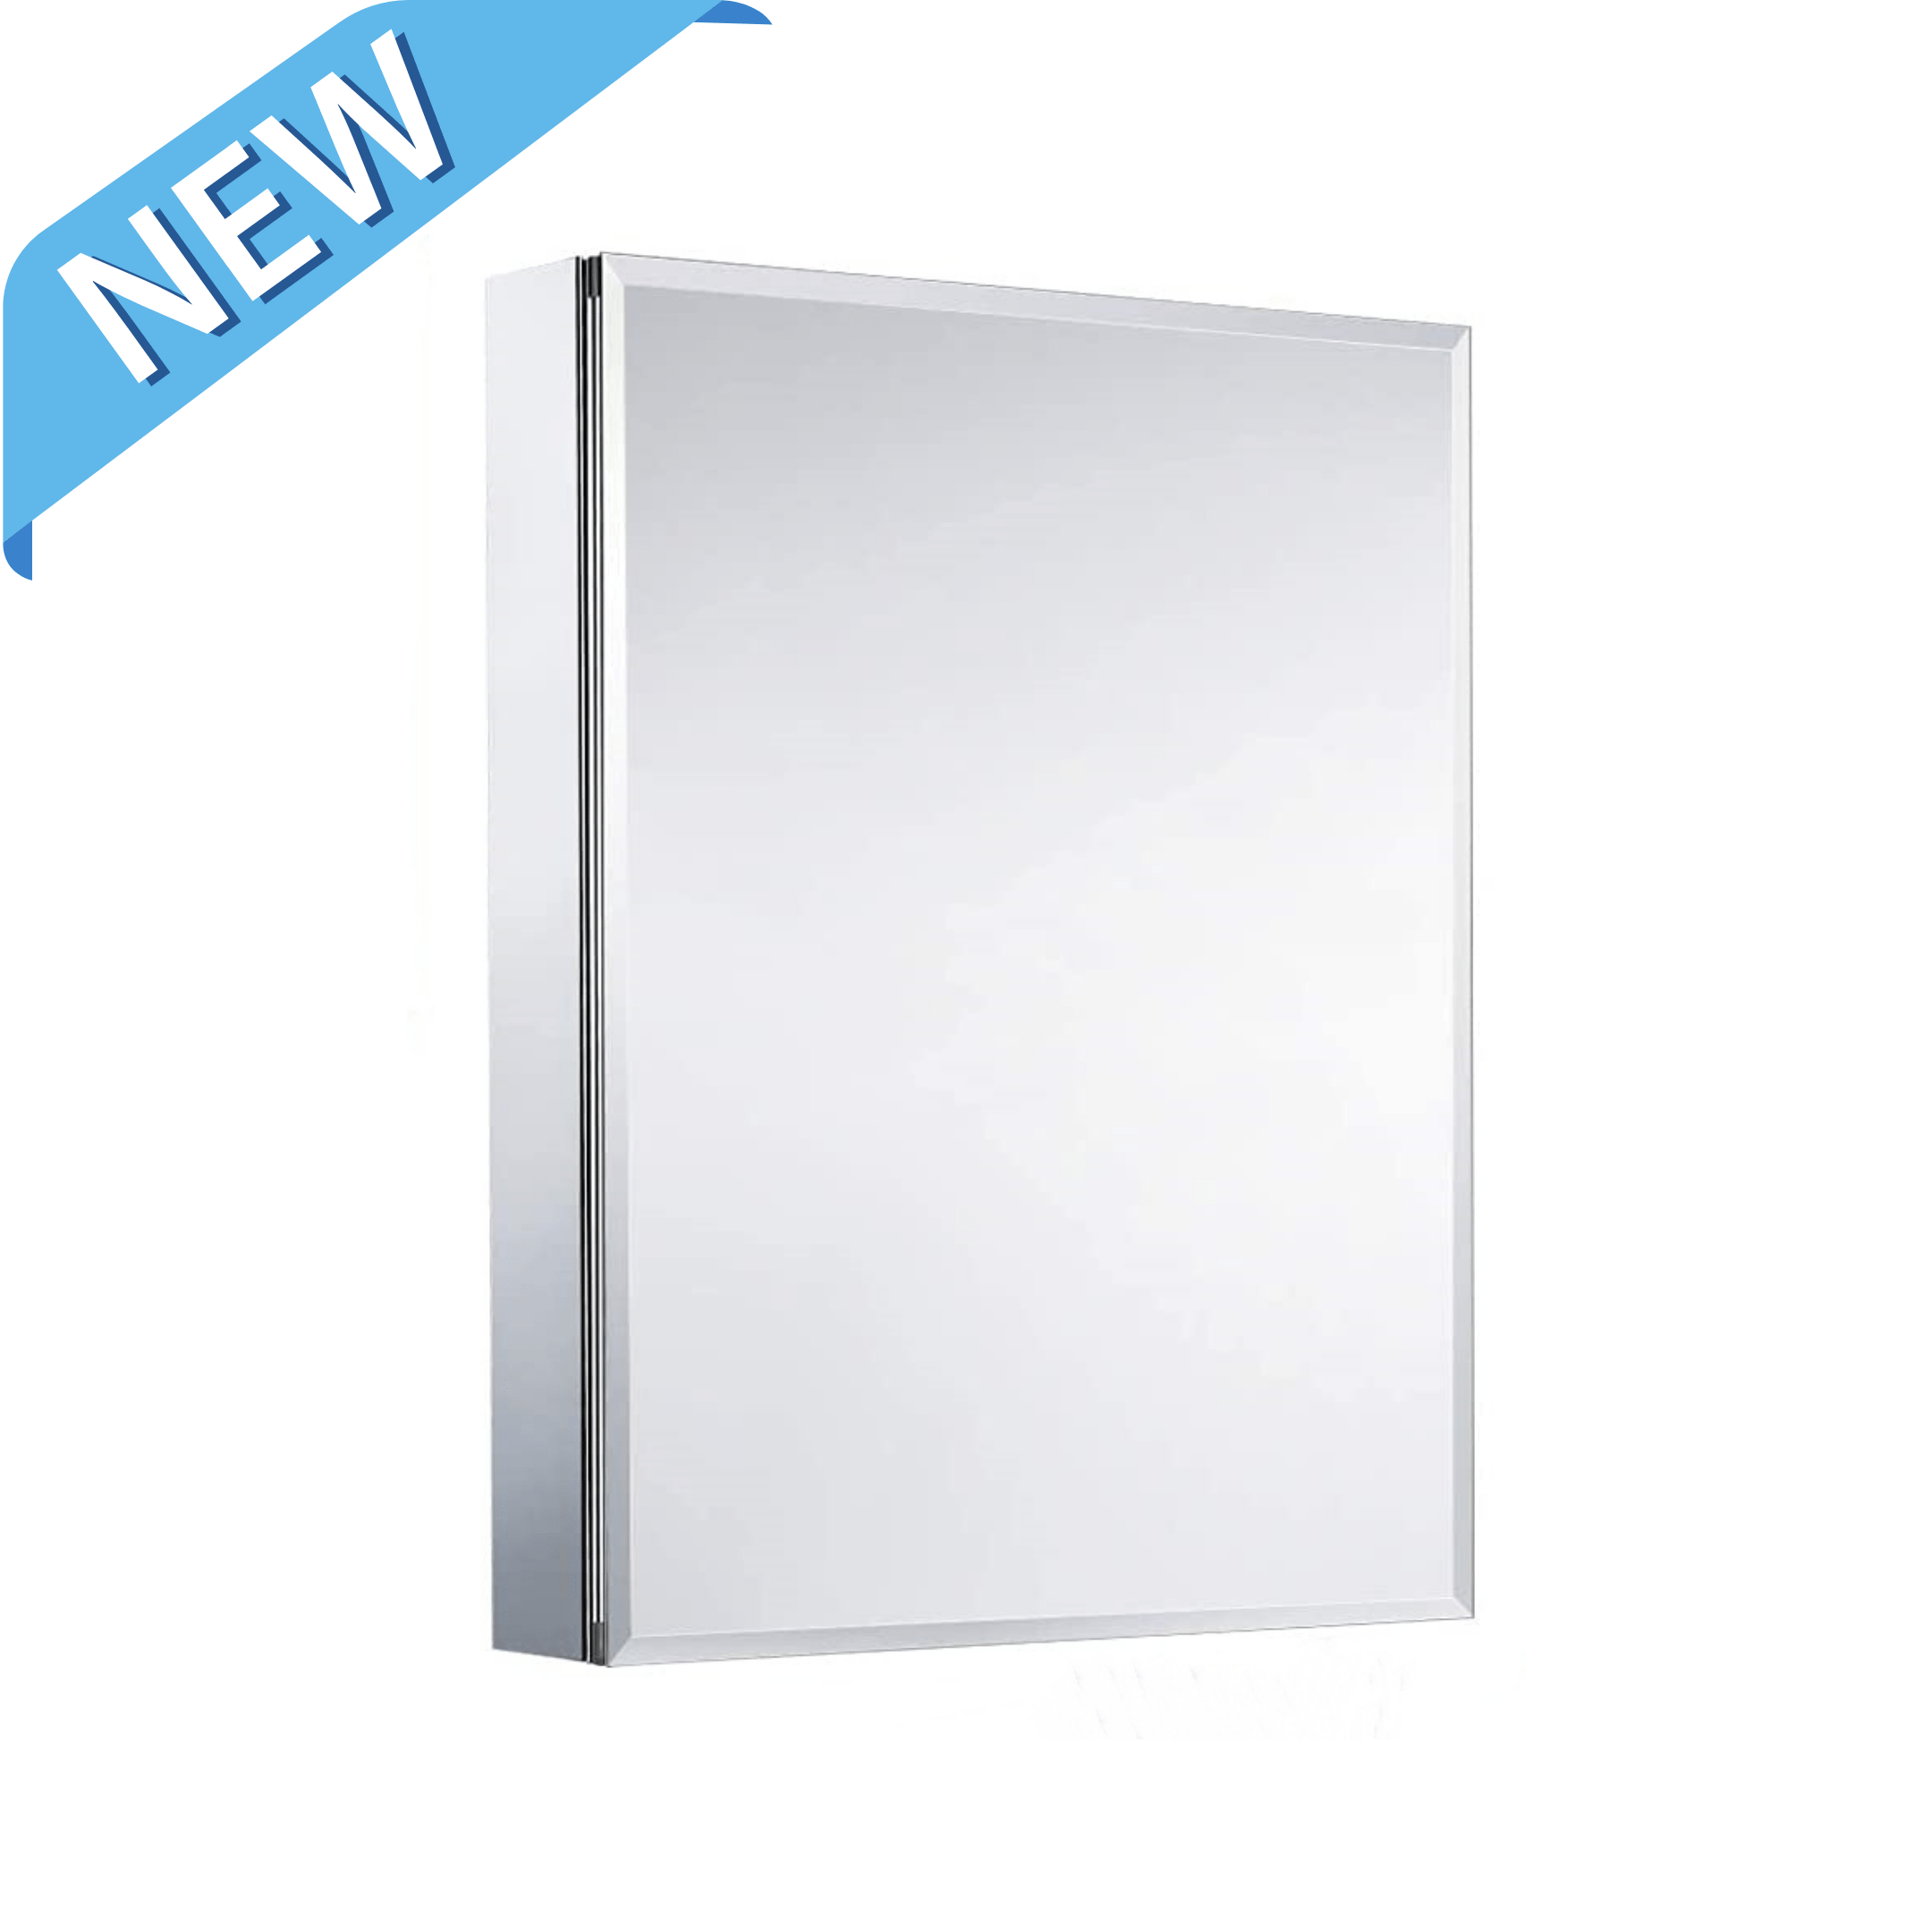 Stylish and Practical 24x30 Inch Medicine Cabinet - Soft-Closing Hinges and Adjustable Shelves for Optimal Storage and Convenience - Eco LED Lightings 